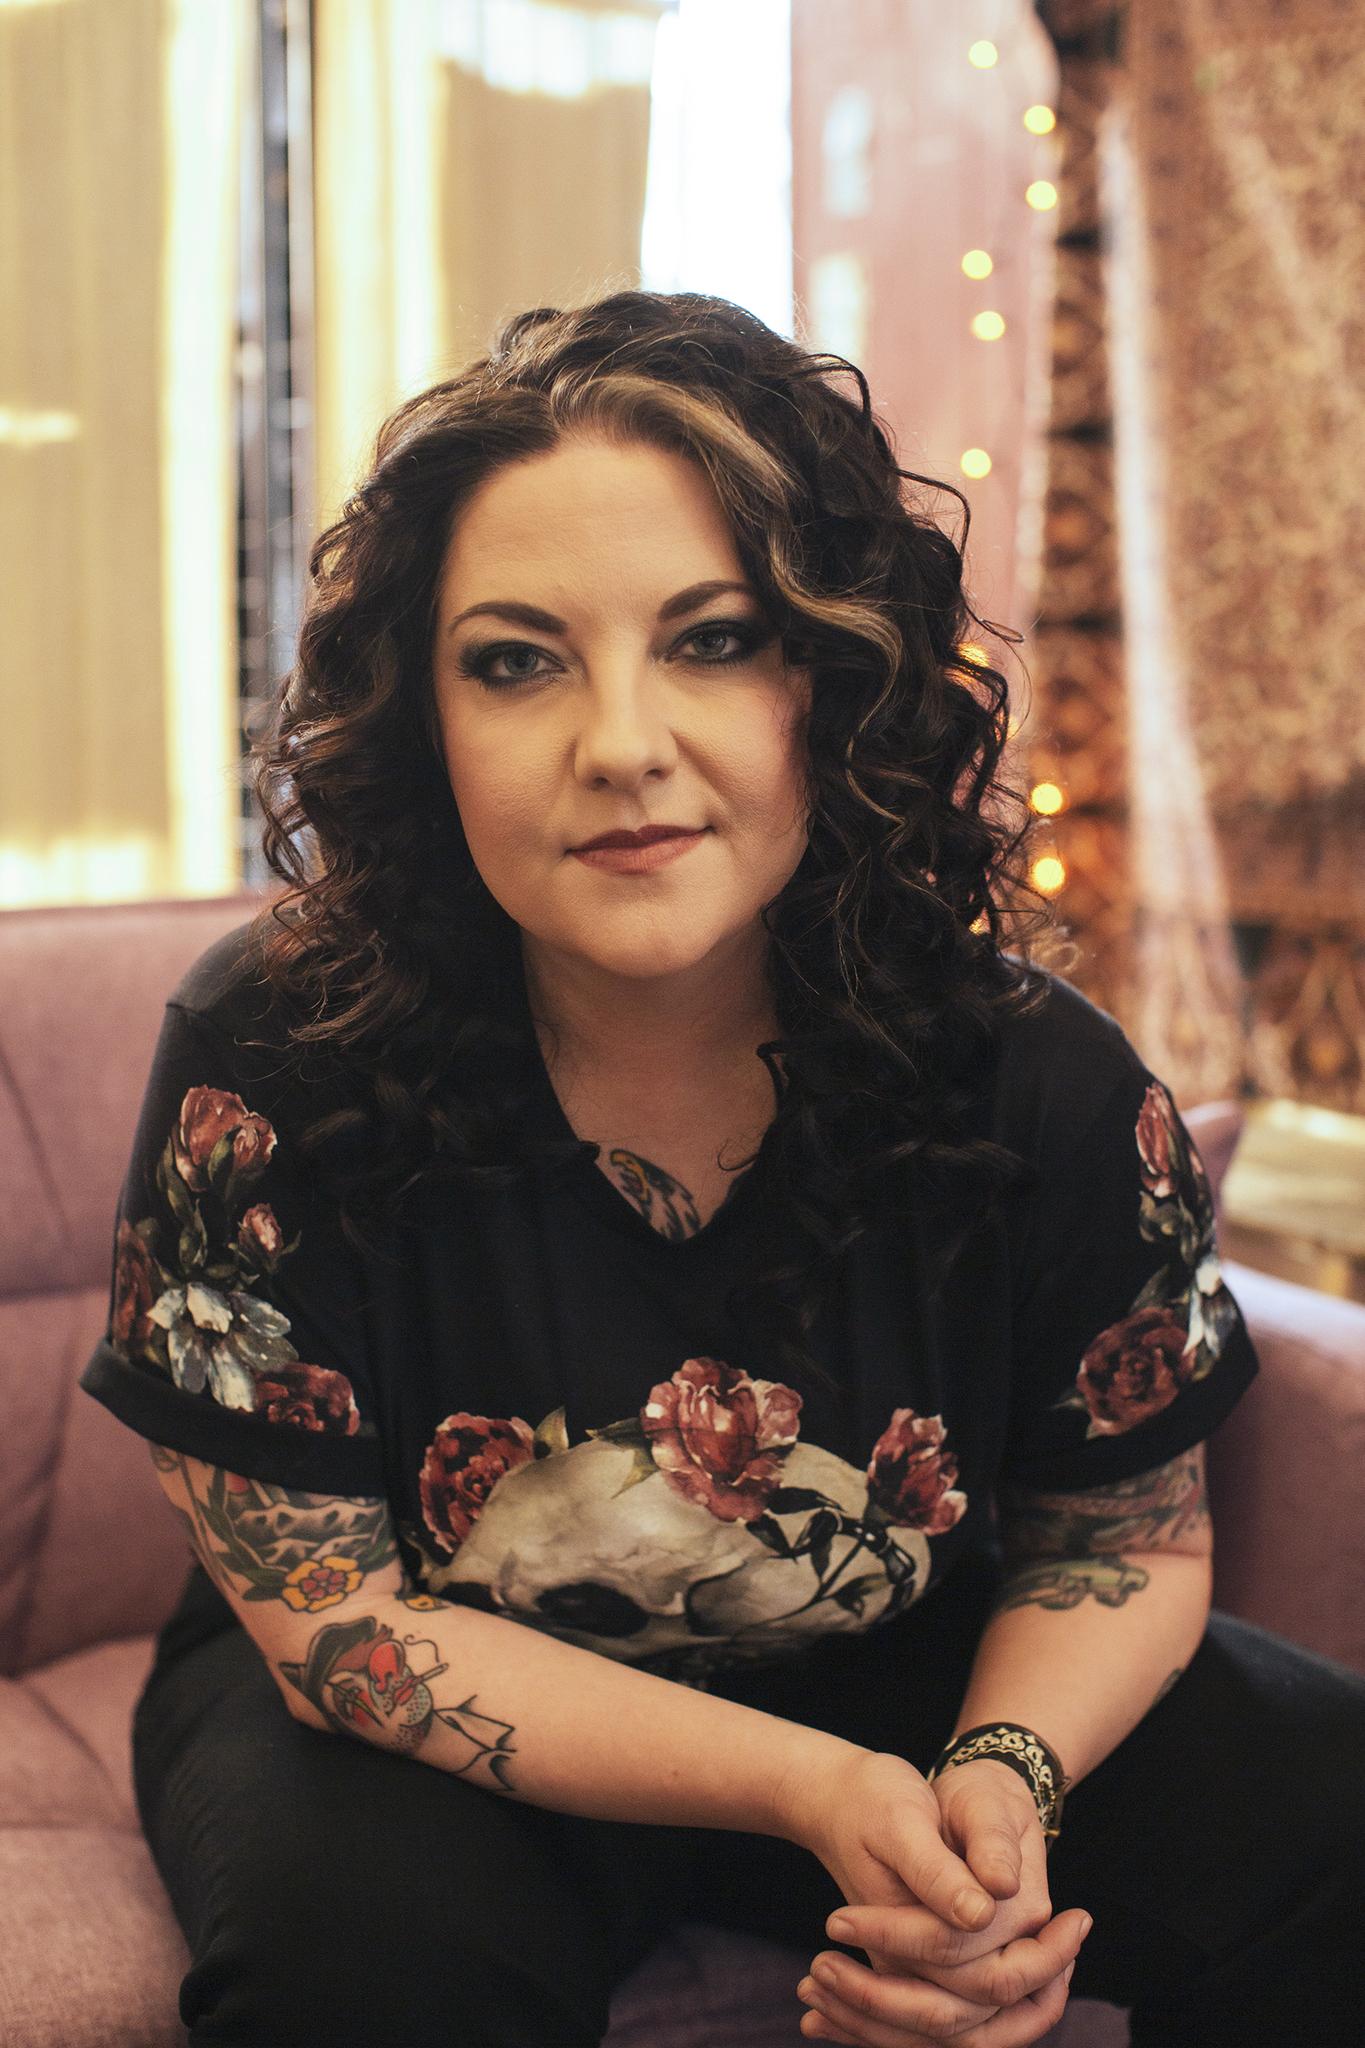 Ashley McBryde - The One Night Standards Tour